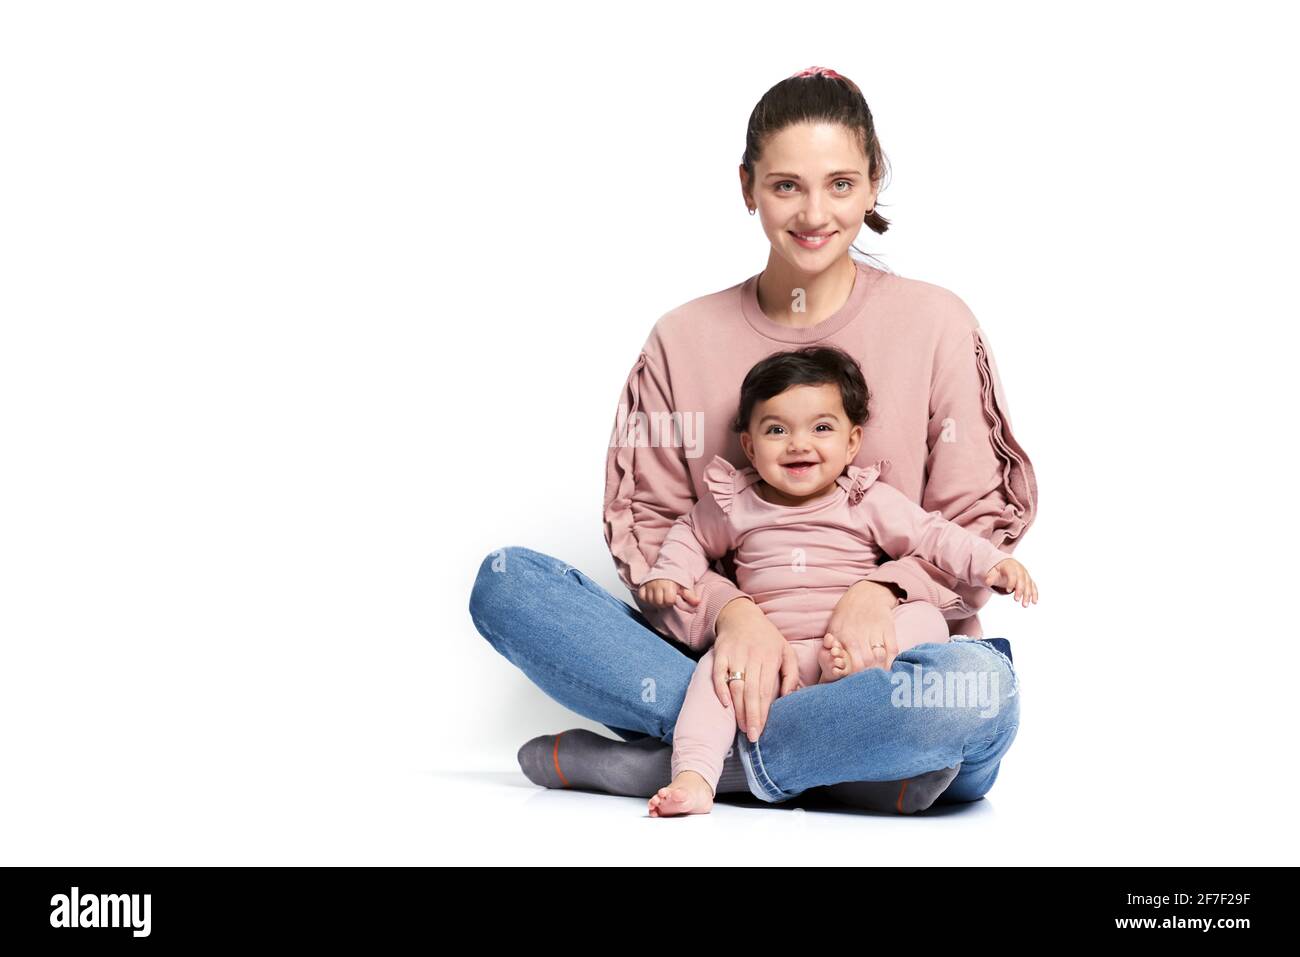 Portrait of cute mother with daughter looking at camera, isolated on white studio background. Young attractive woman holding sweet adorable child on leg while sitting on floor in lotus pose. Stock Photo